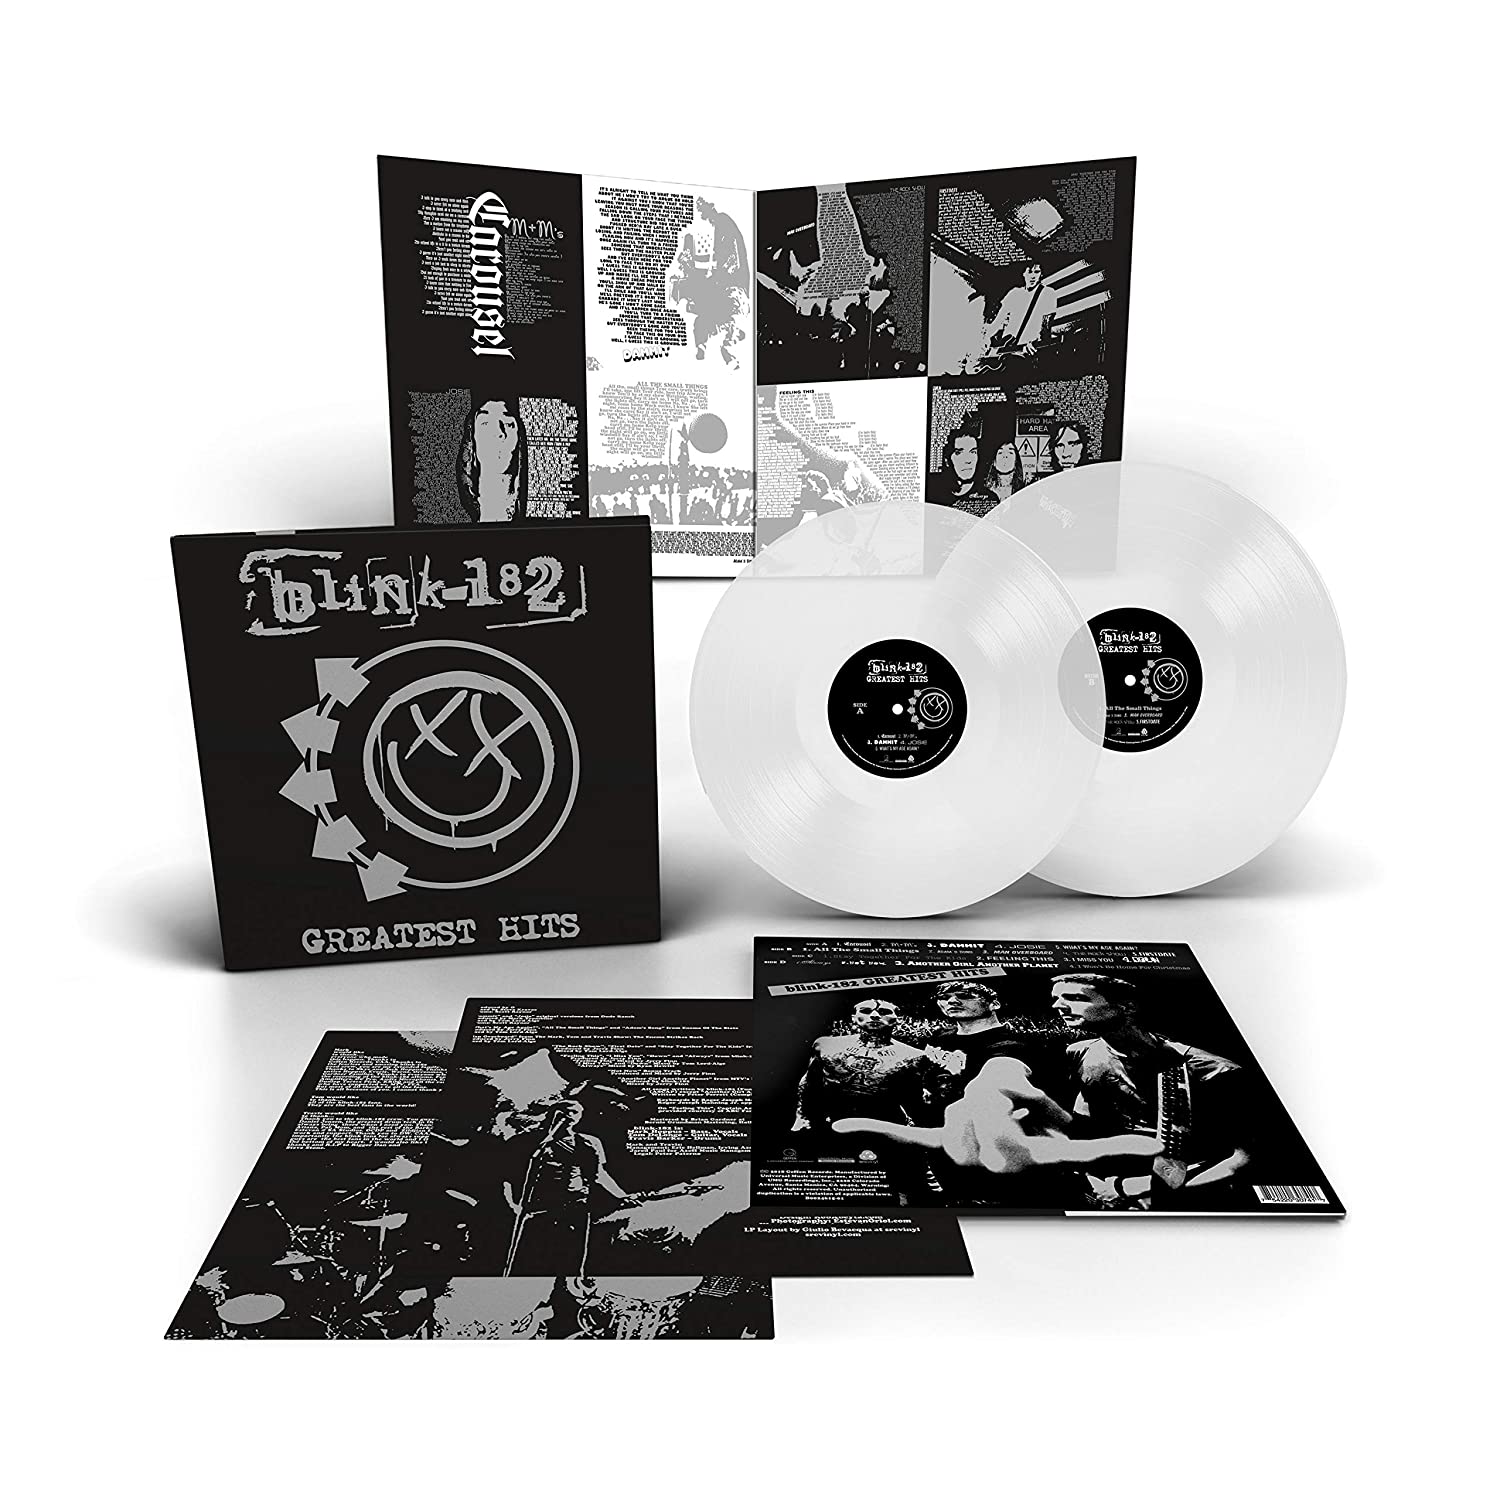 Blink-182 'Greatest Hits' (Colored) Vinyl Record LP